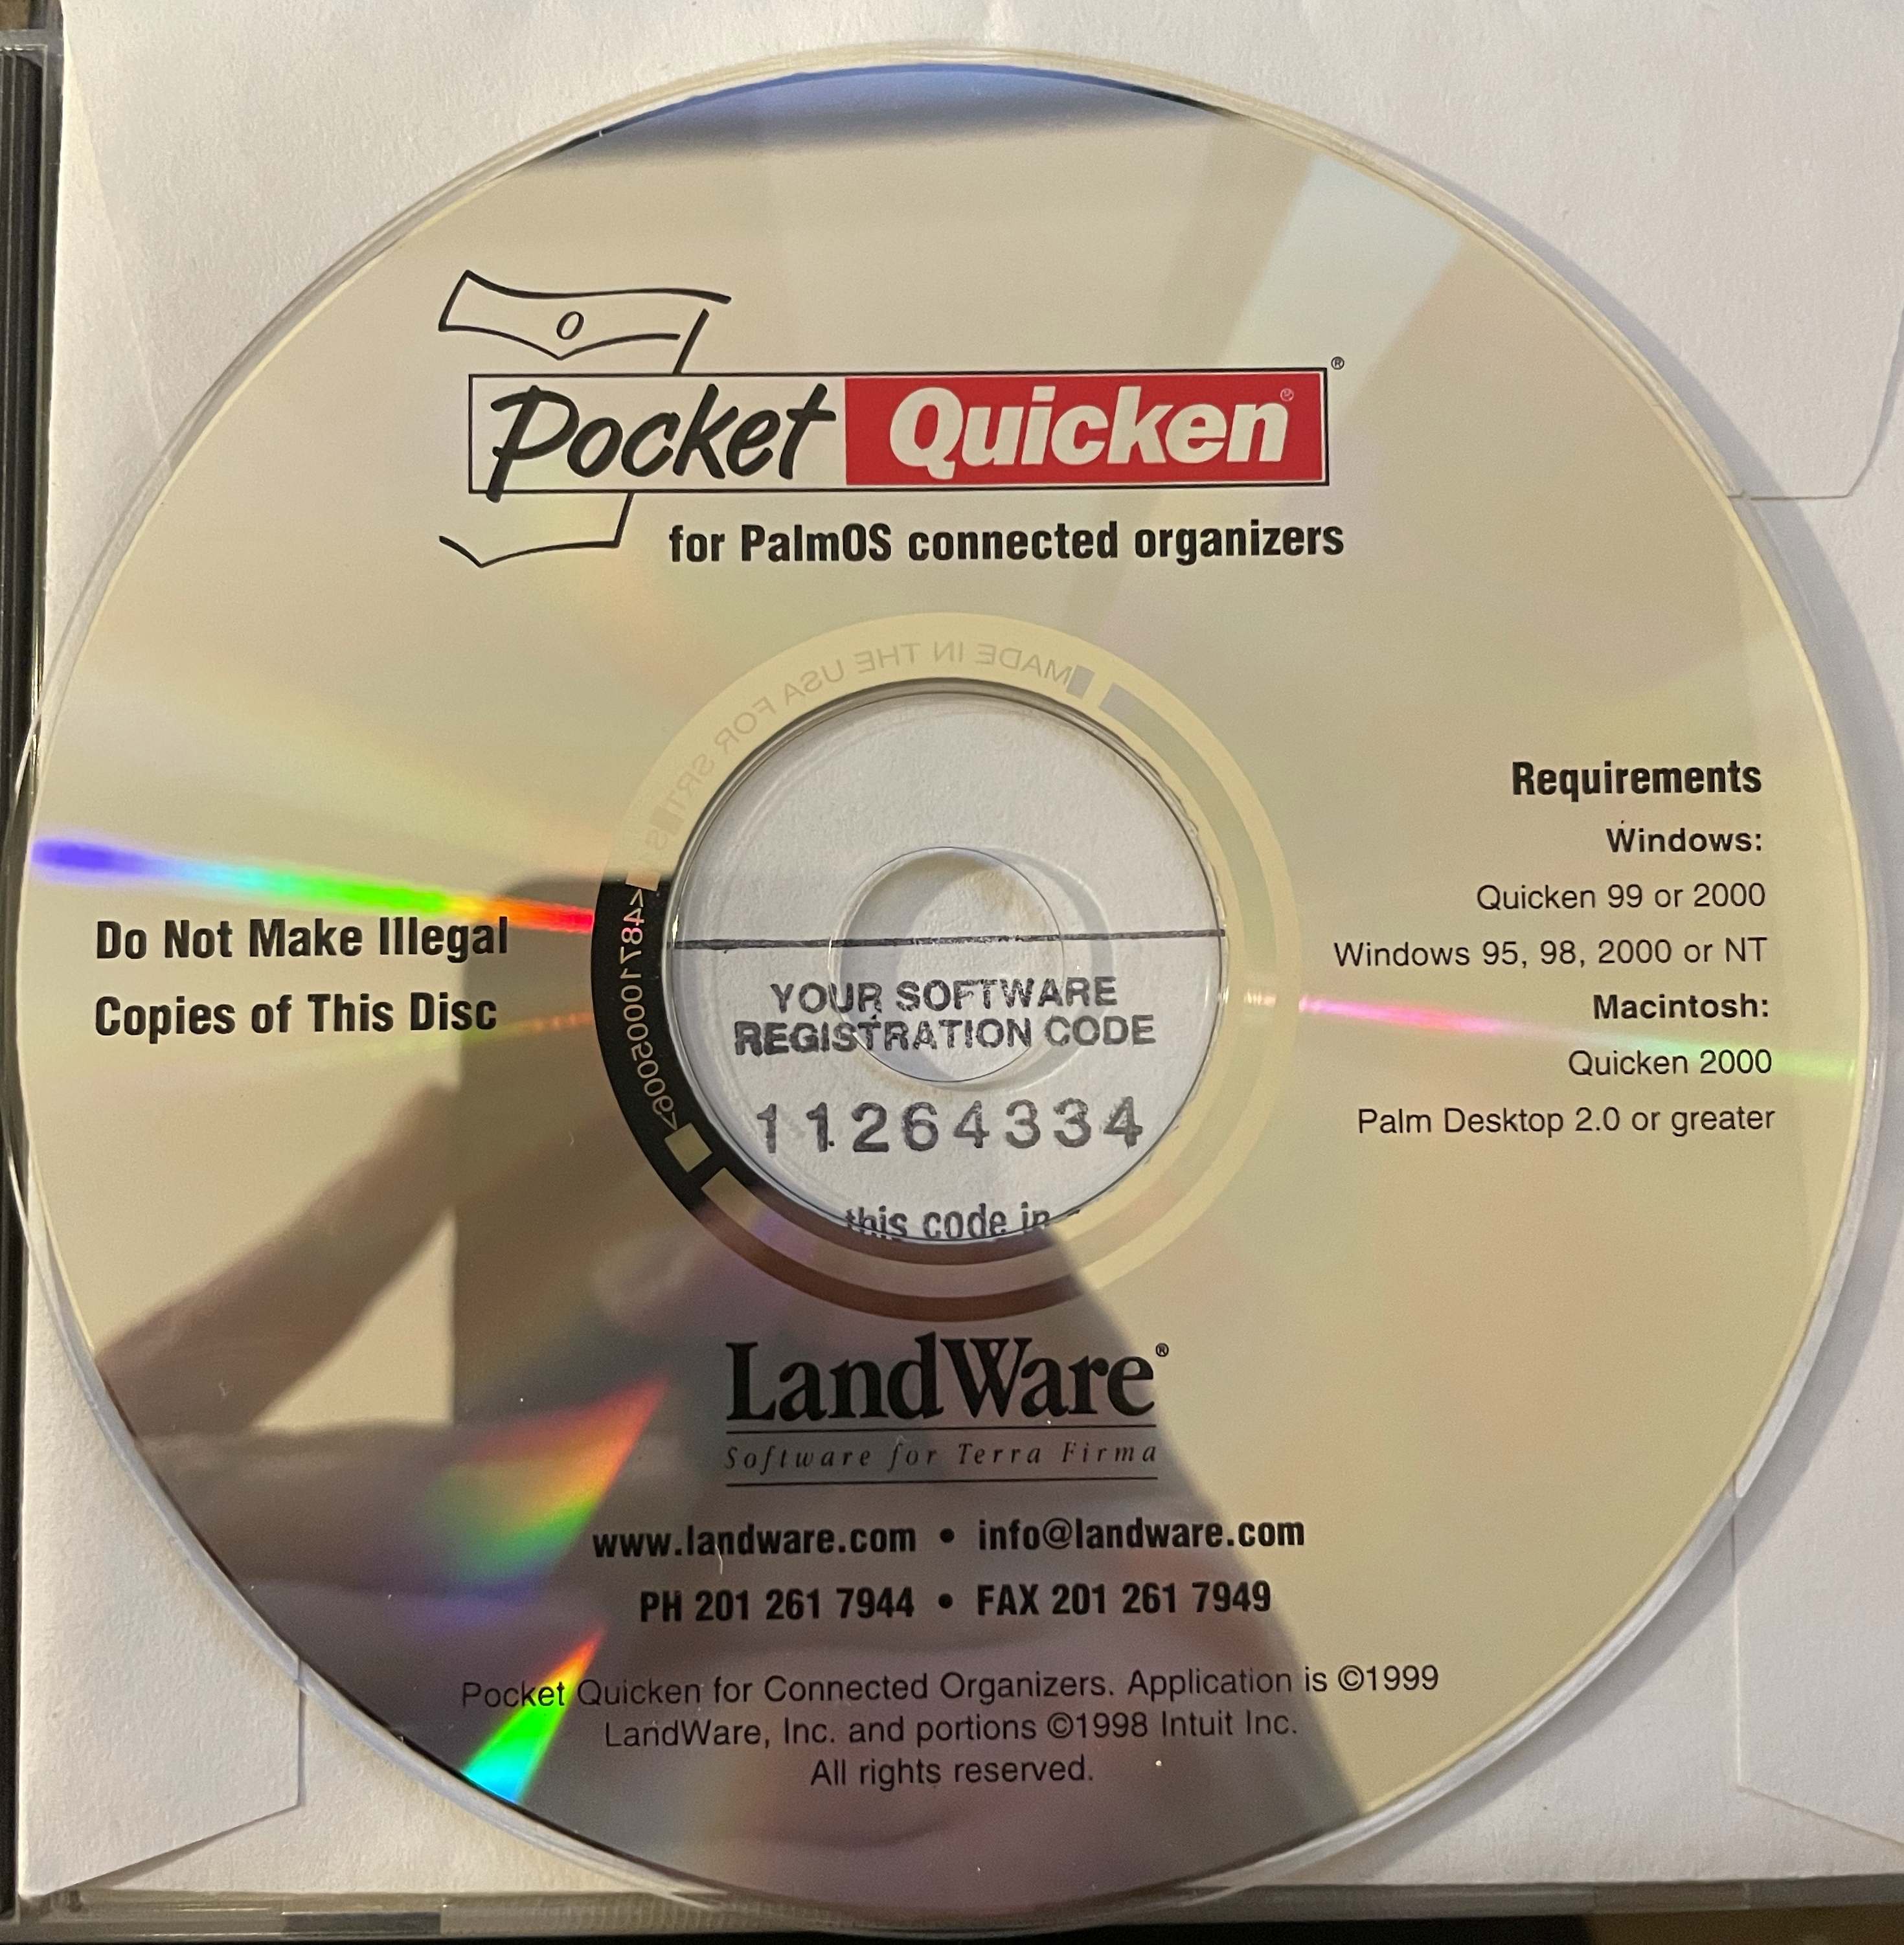 Pocket Quicken for Palm OS